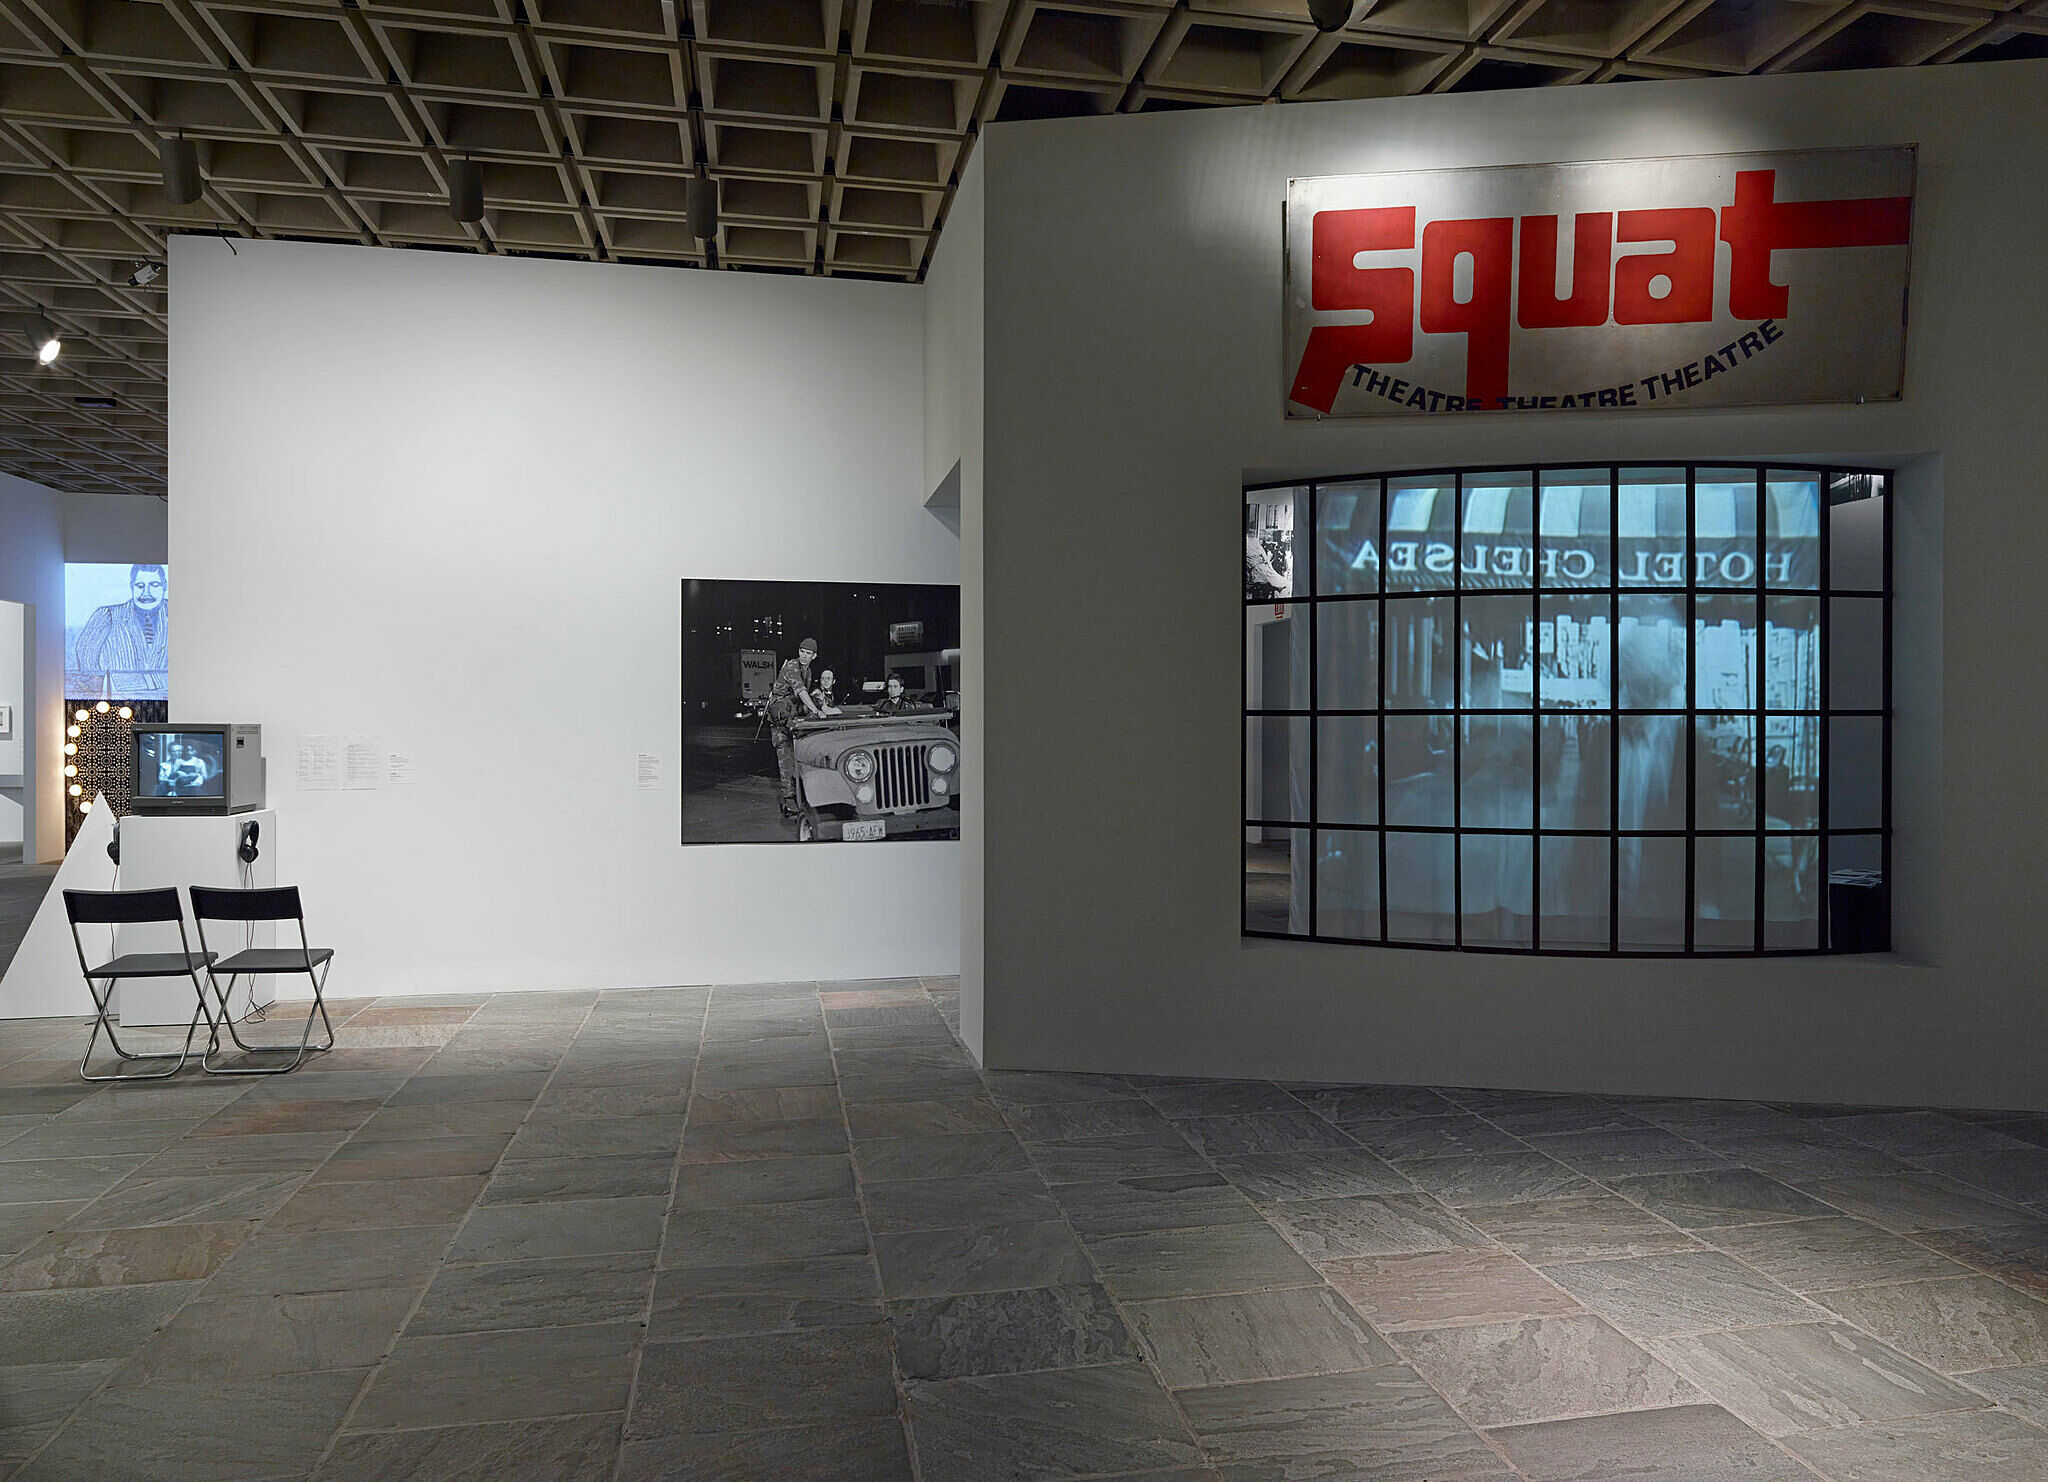 Art installation in a gallery with a window, two chairs and photo on the wall.